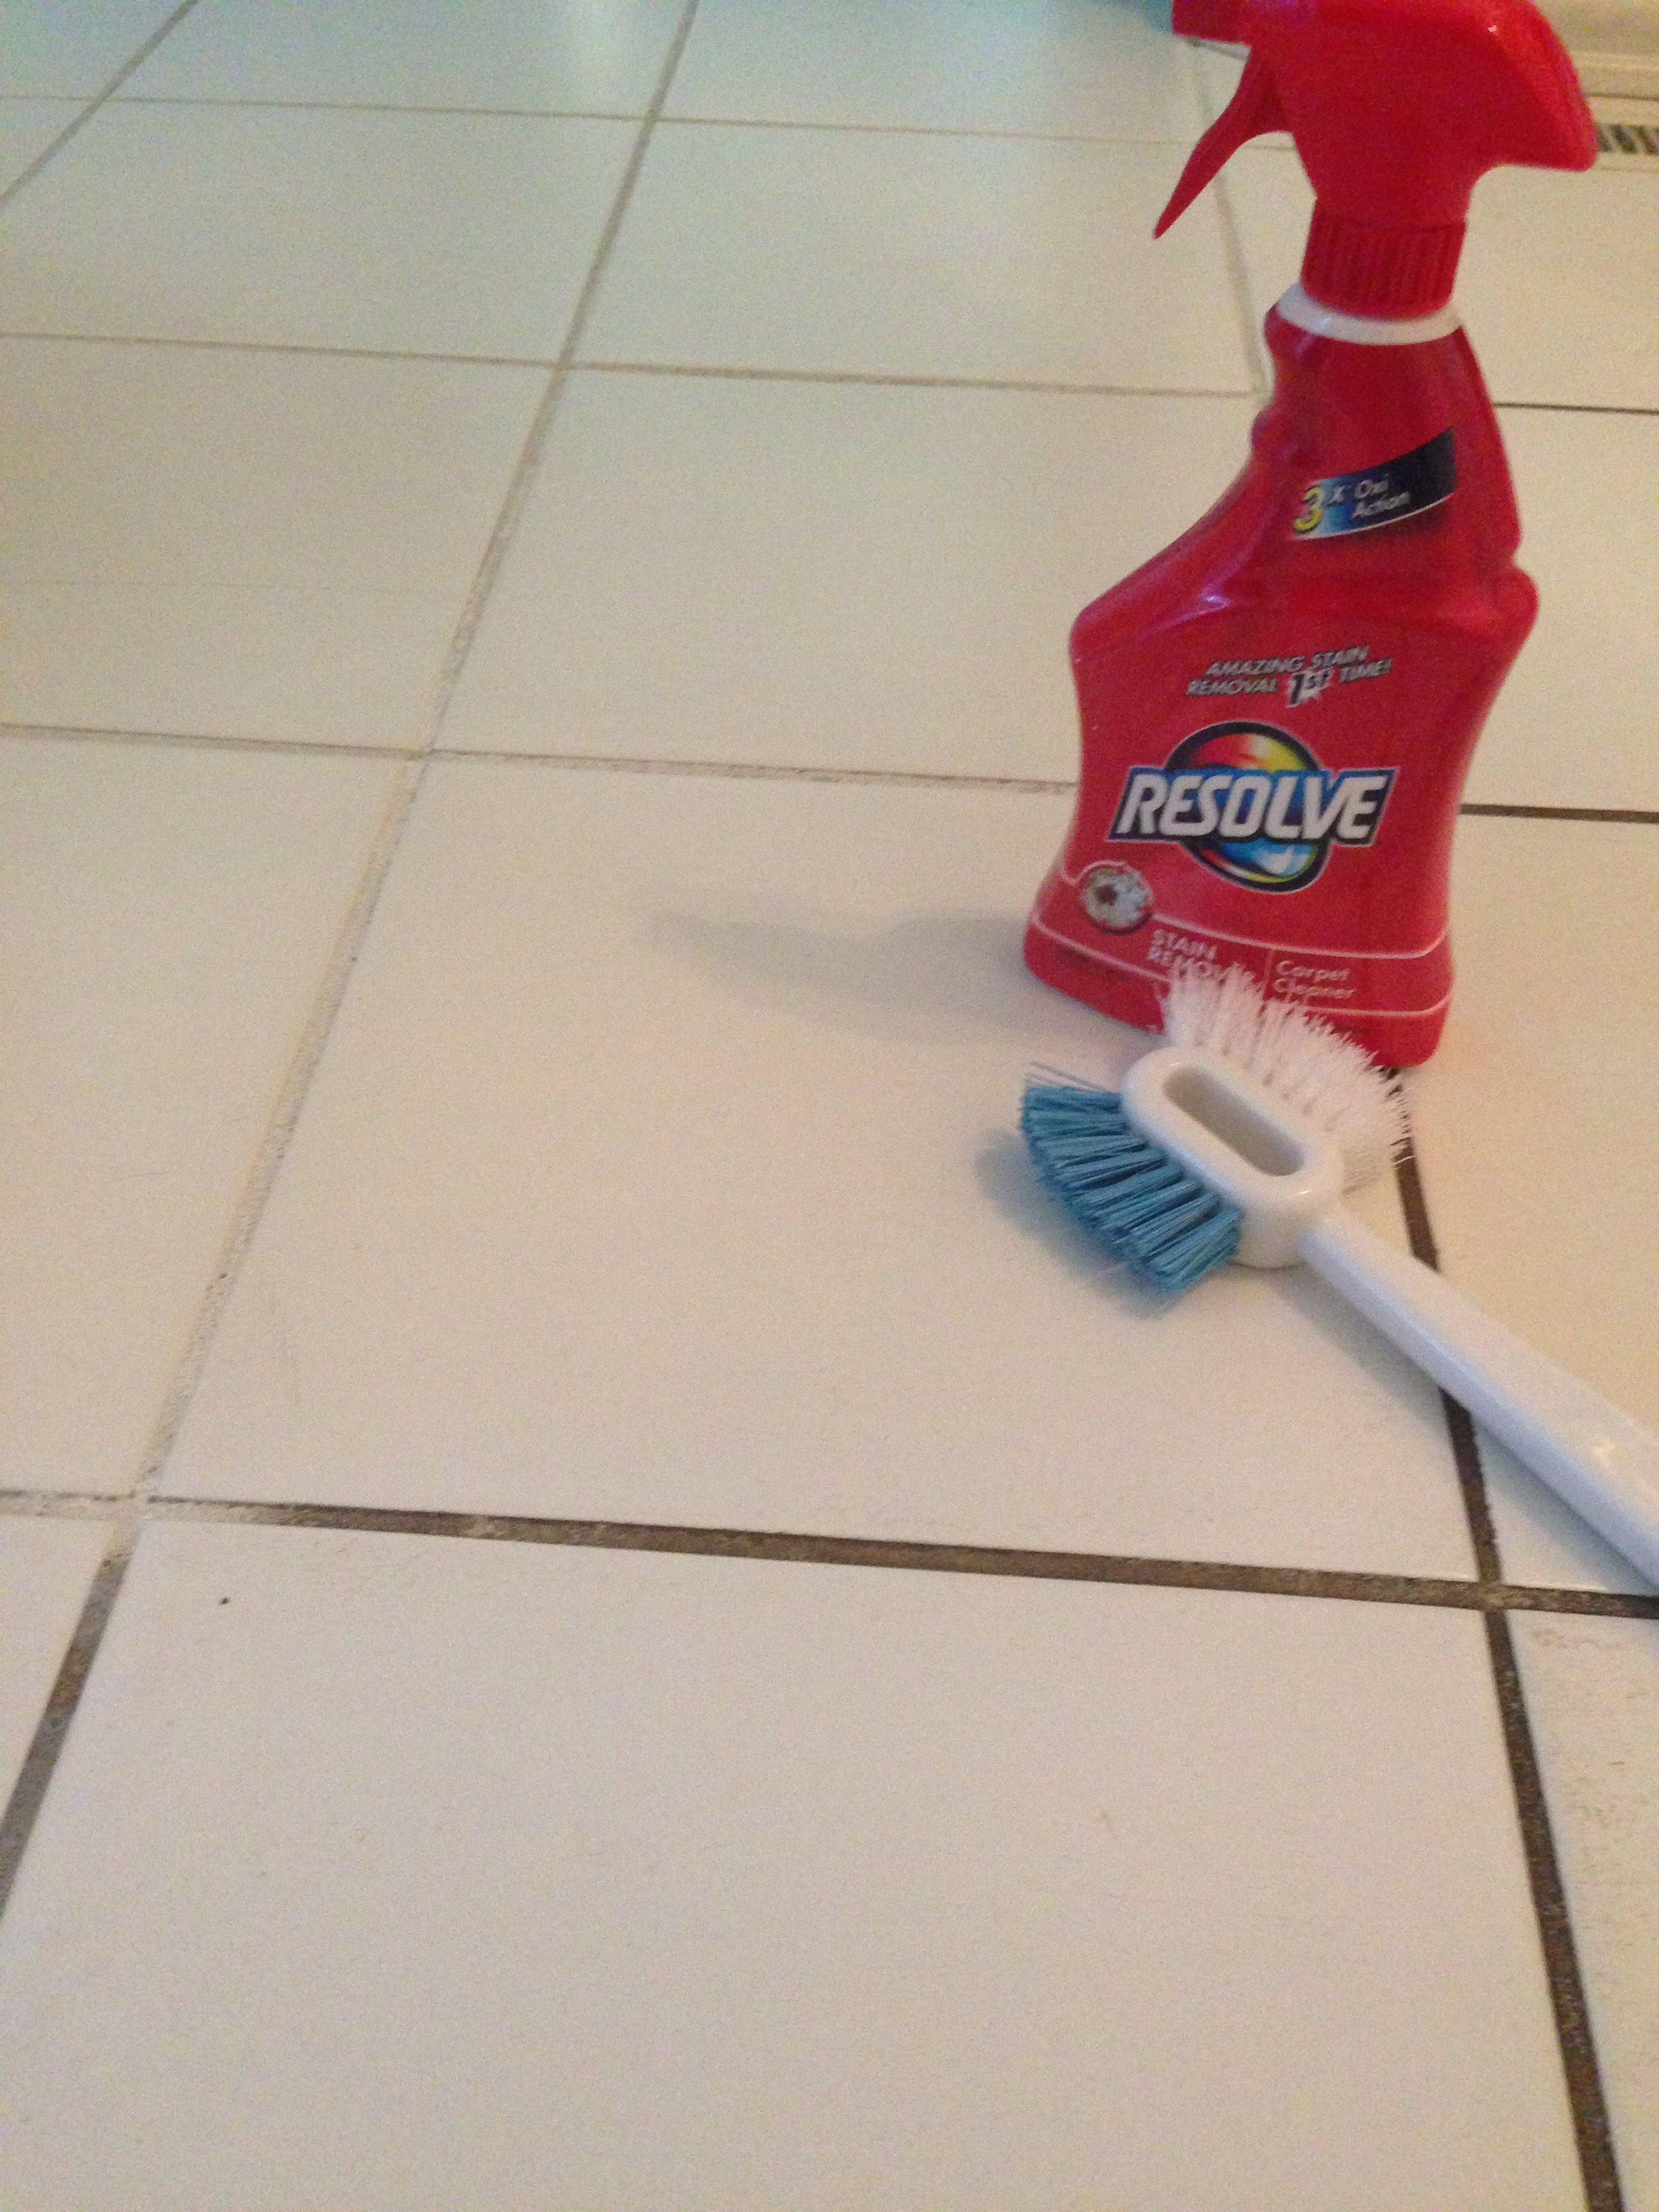 Resolve Carpet Cleaner To Clean Grout Cleaning Hacks with regard to measurements 2448 X 3264